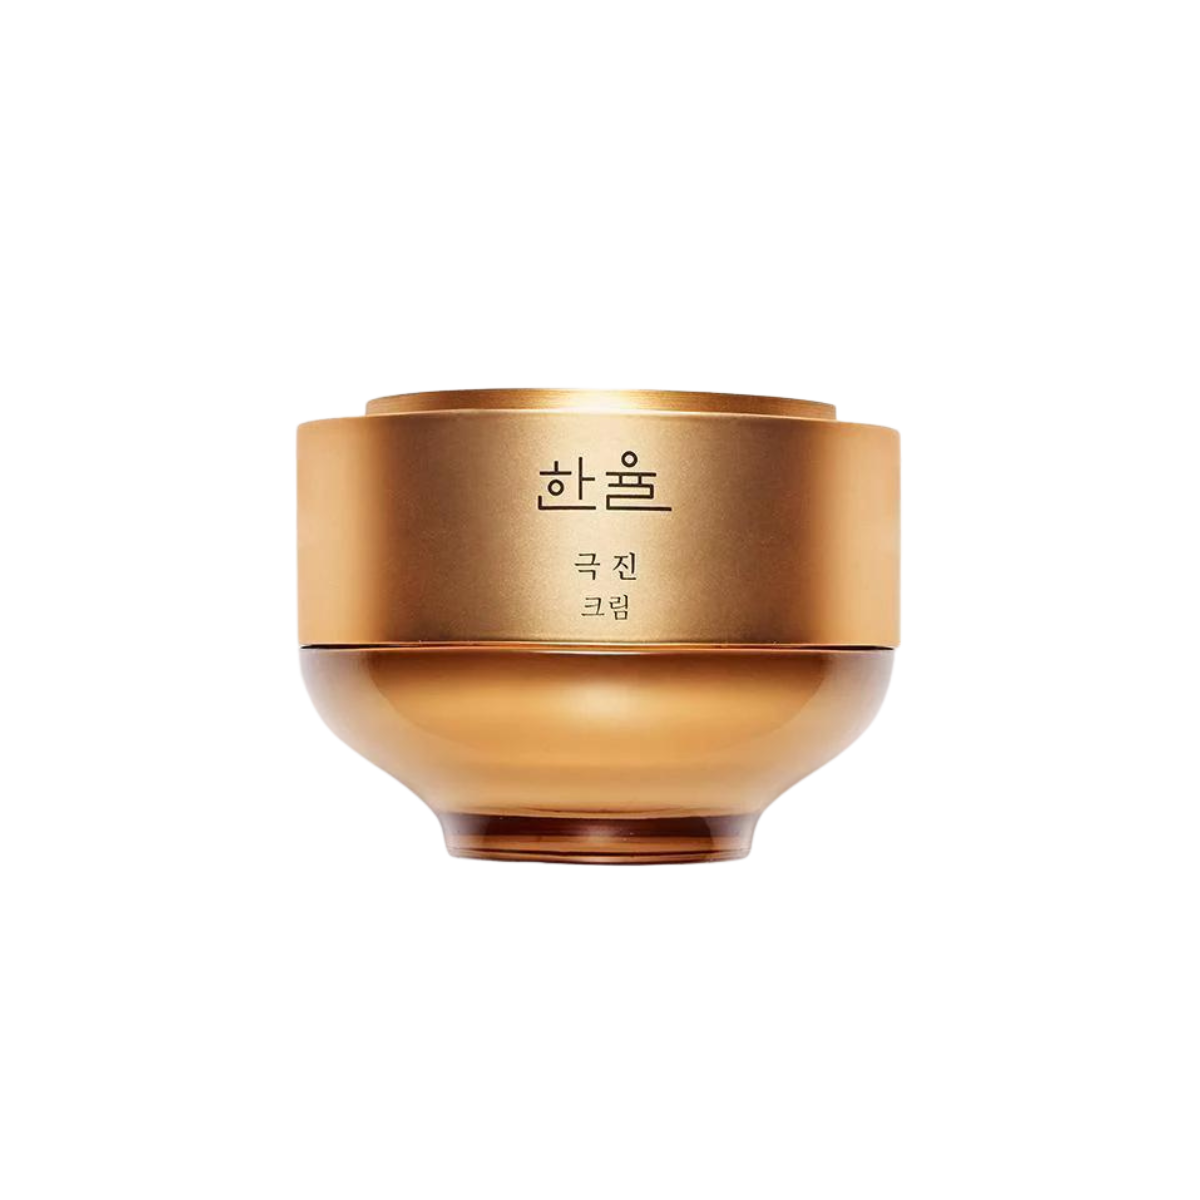 A 50ml jar of Hanyul Geuk Jin Cream by The Face Shop, a luxurious golden cream for radiant skin.